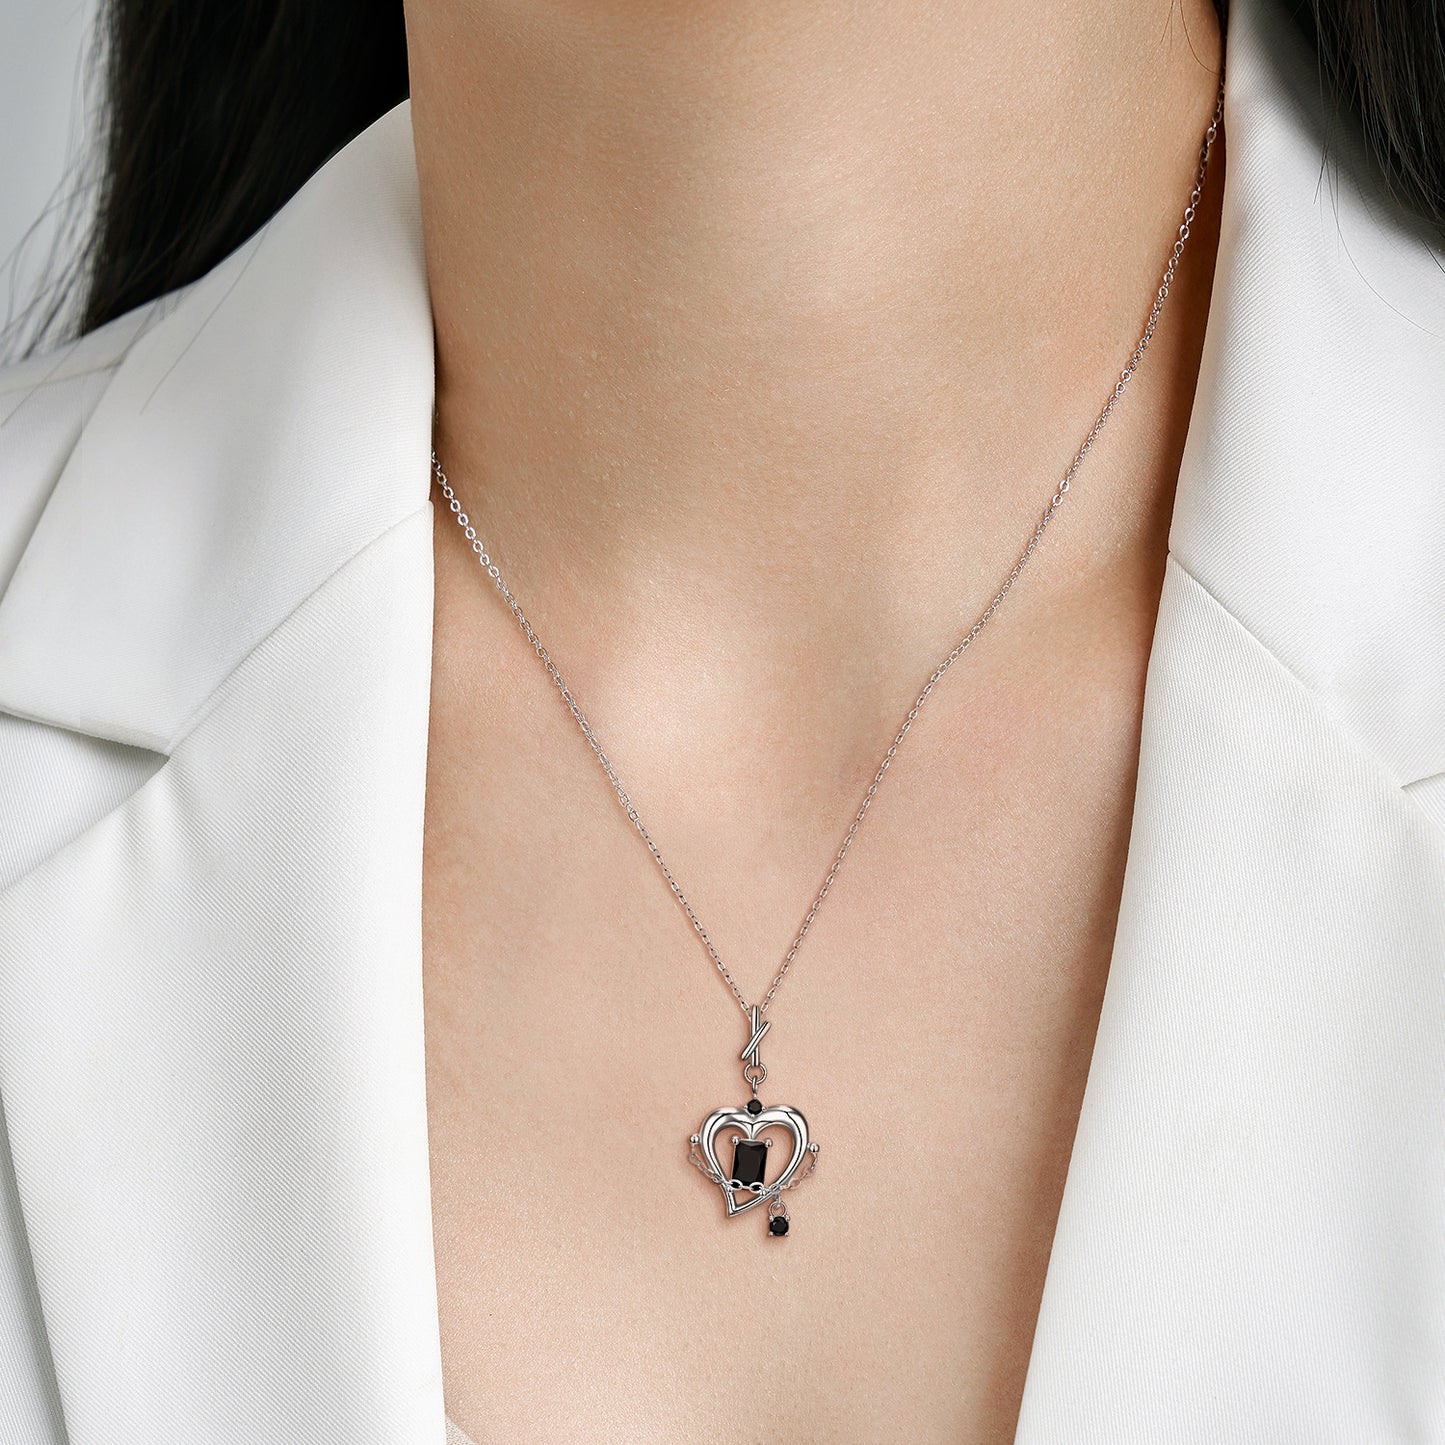 Hollow Heart Shape with Black Zircon Silver Necklace